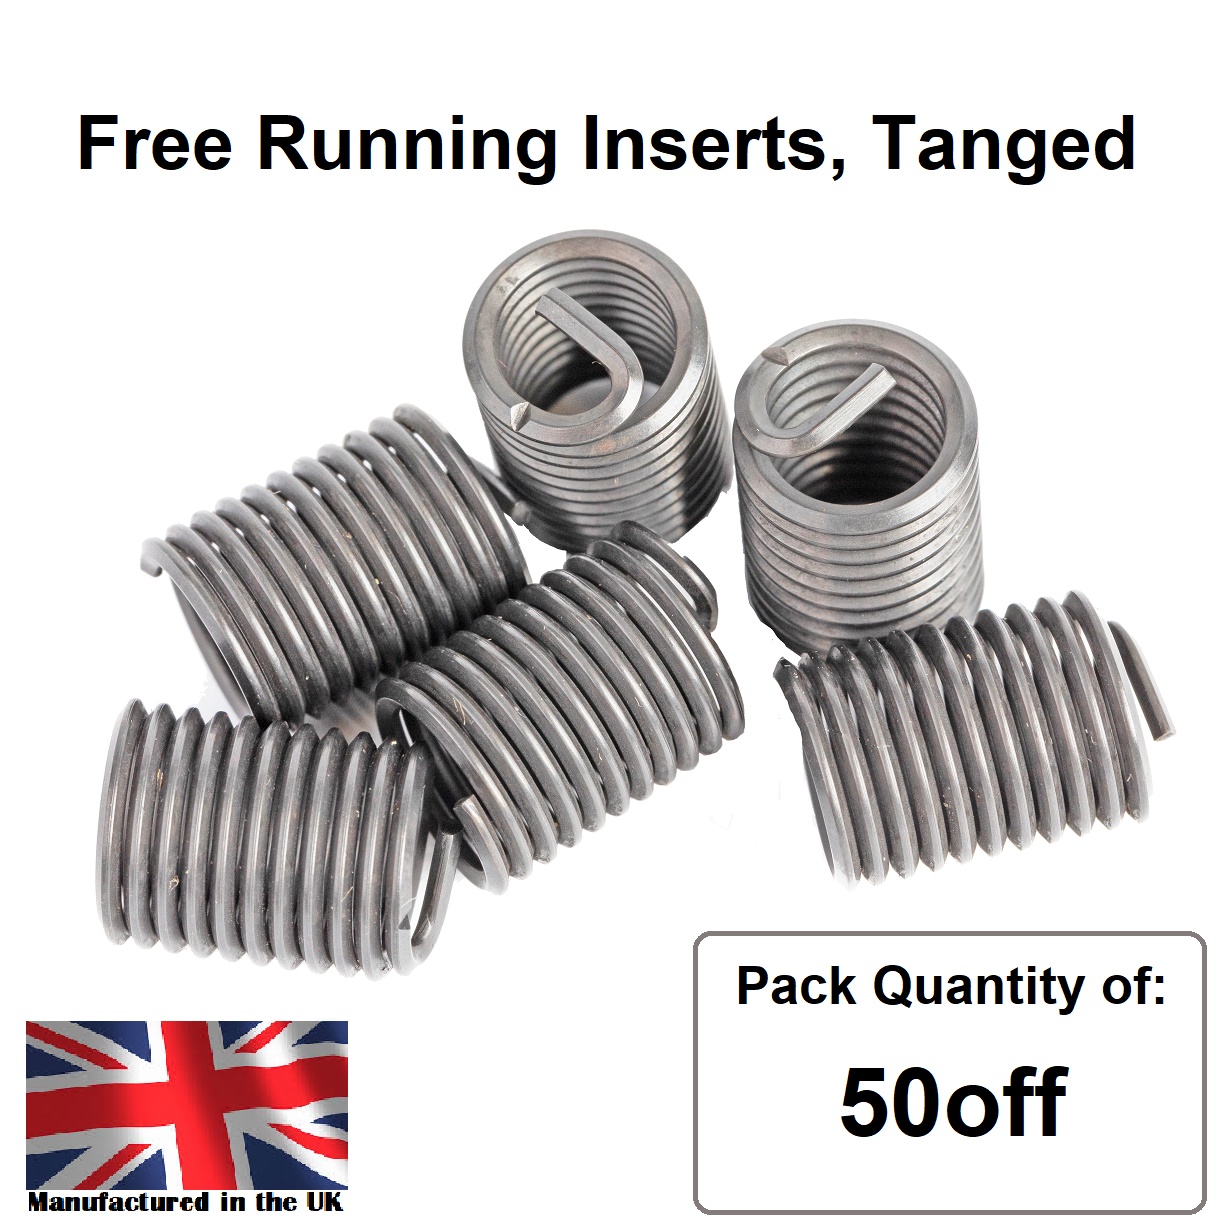 1/4 x 20 x 2D UNC, Free Running, Tanged, Wire Thread Repair Insert, 304/A2 Stainless (Pack 50)